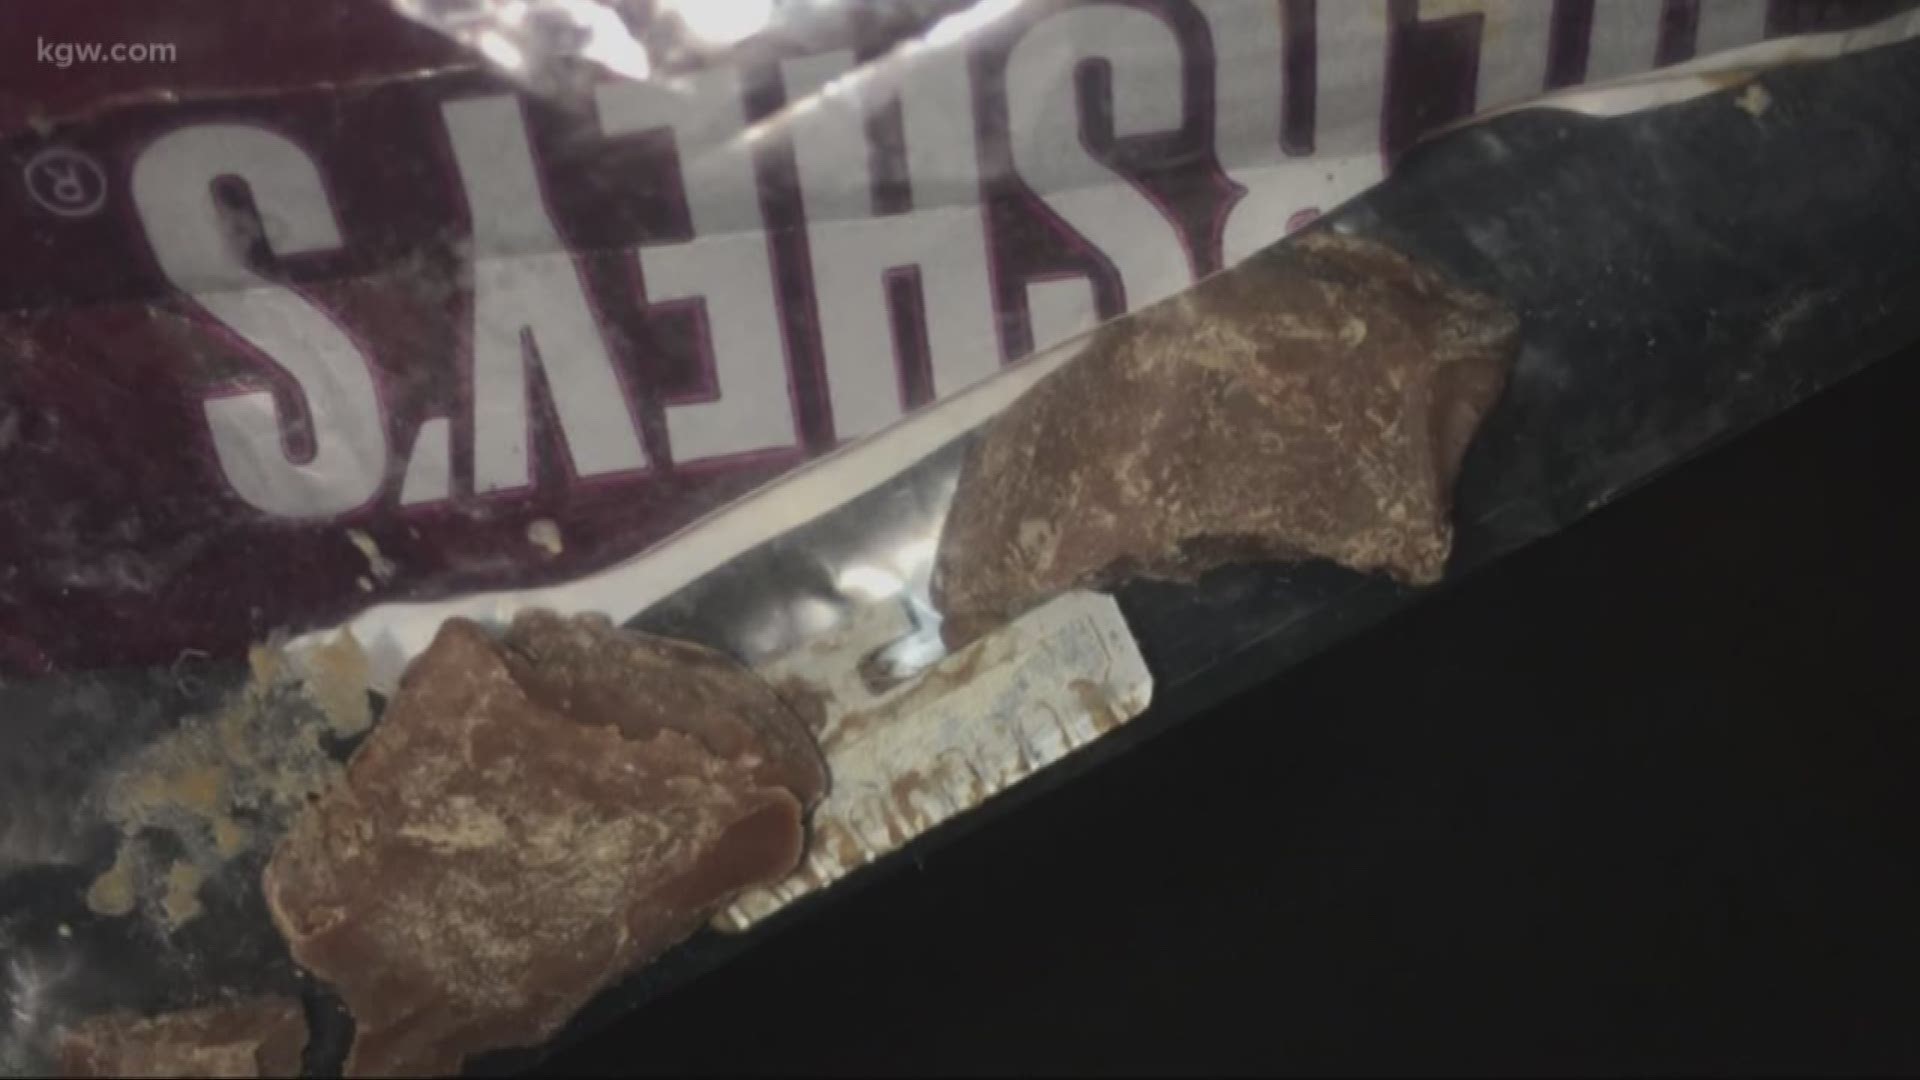 The child who bit into the trick-or-treat candy was not seriously injured. Police ask people who trick-or-treated in the area to inspect their candy closely.